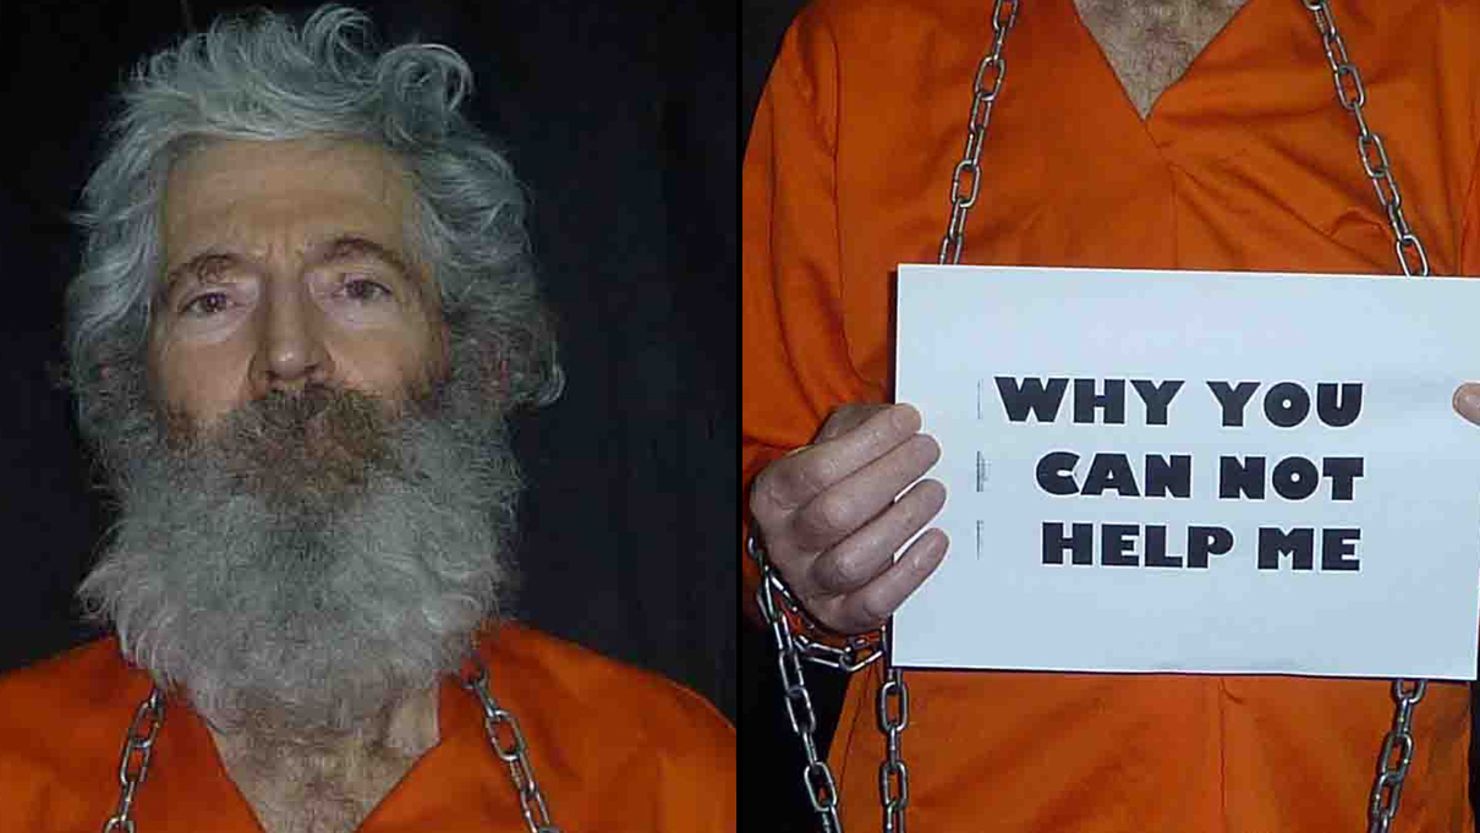 Former FBI agent Robert Levinson vanished while on a business trip to Iran in 2007. His family released this photo in January.